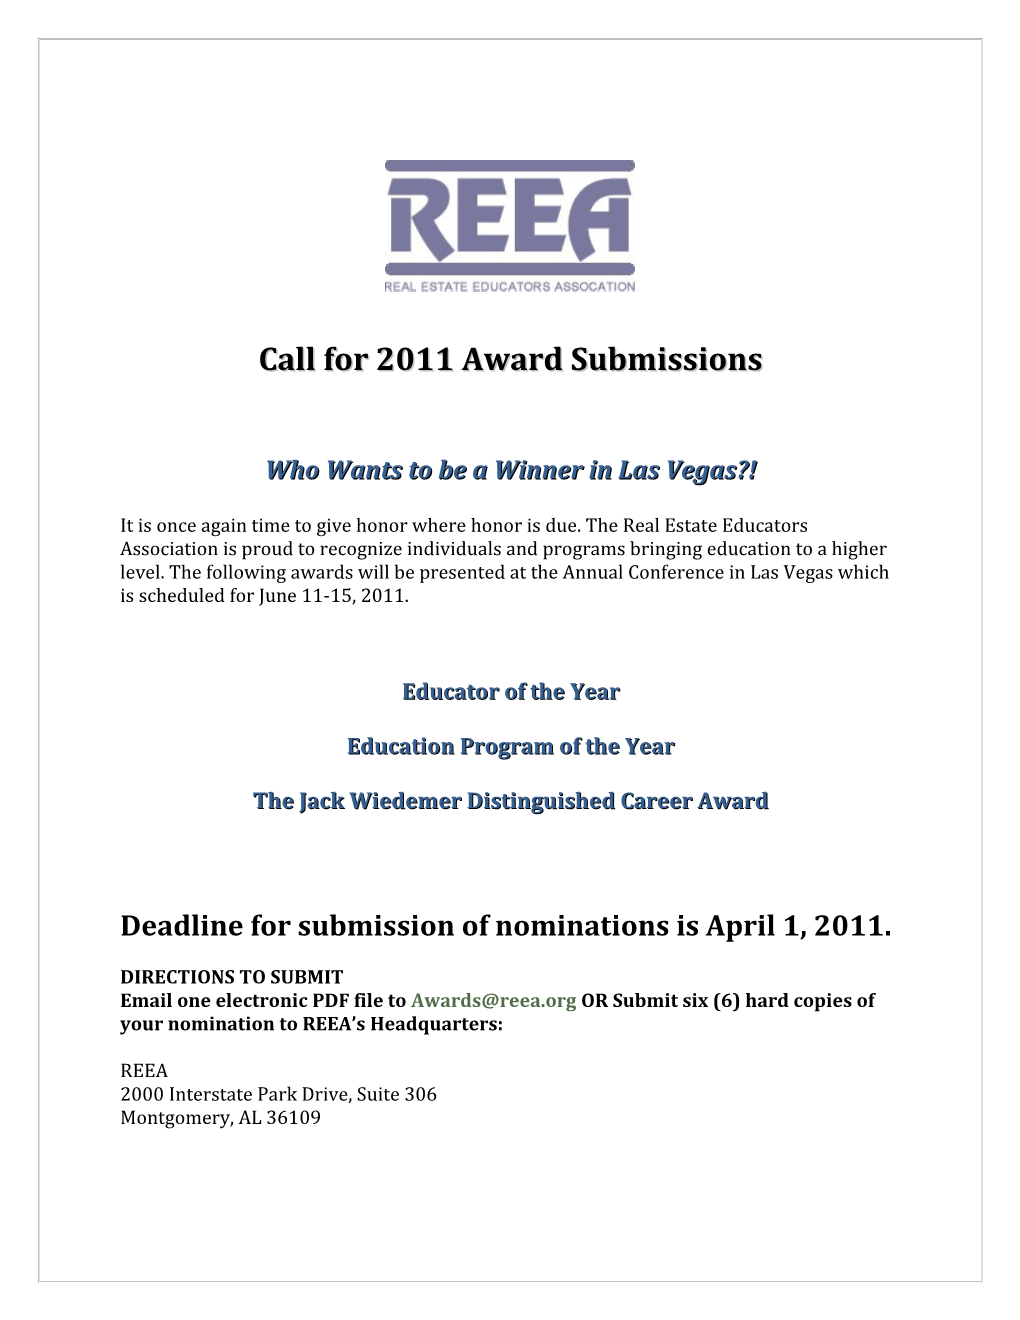 Call for 2011 Award Submissions